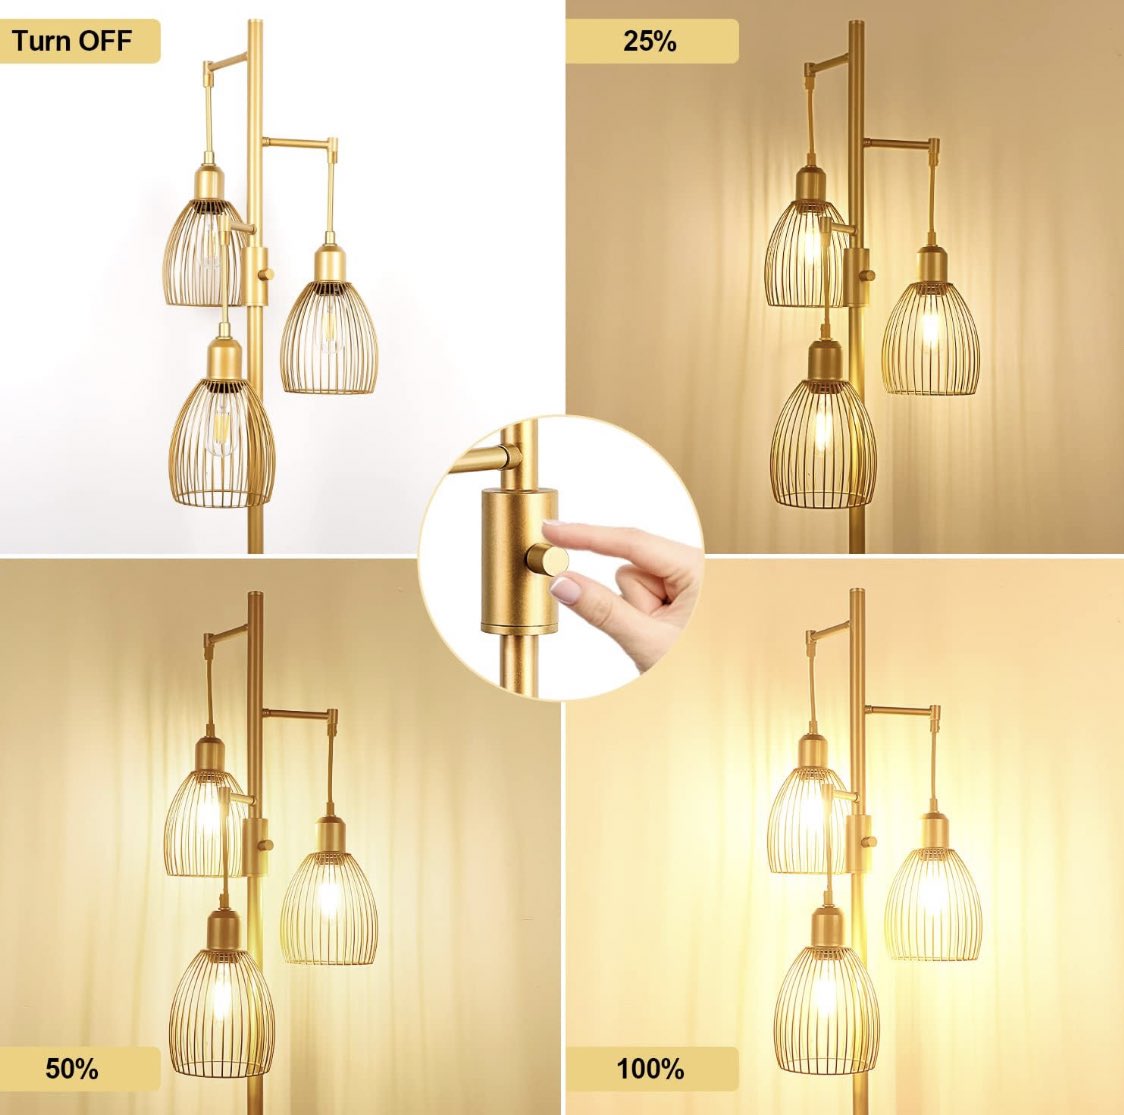 Dimmable Industrial Floor Lamps for Living Room, Gold Tree Standing Tall Lamps with 3 Elegant Teardrop Cage Head & 800 Lumens LED Bulbs. Click below to know more;

amzn.to/3Q4i0tW

#bulbs #lights #decor #office #livingroom #livingroomlight #bedroom #lamps #Lamps #modern